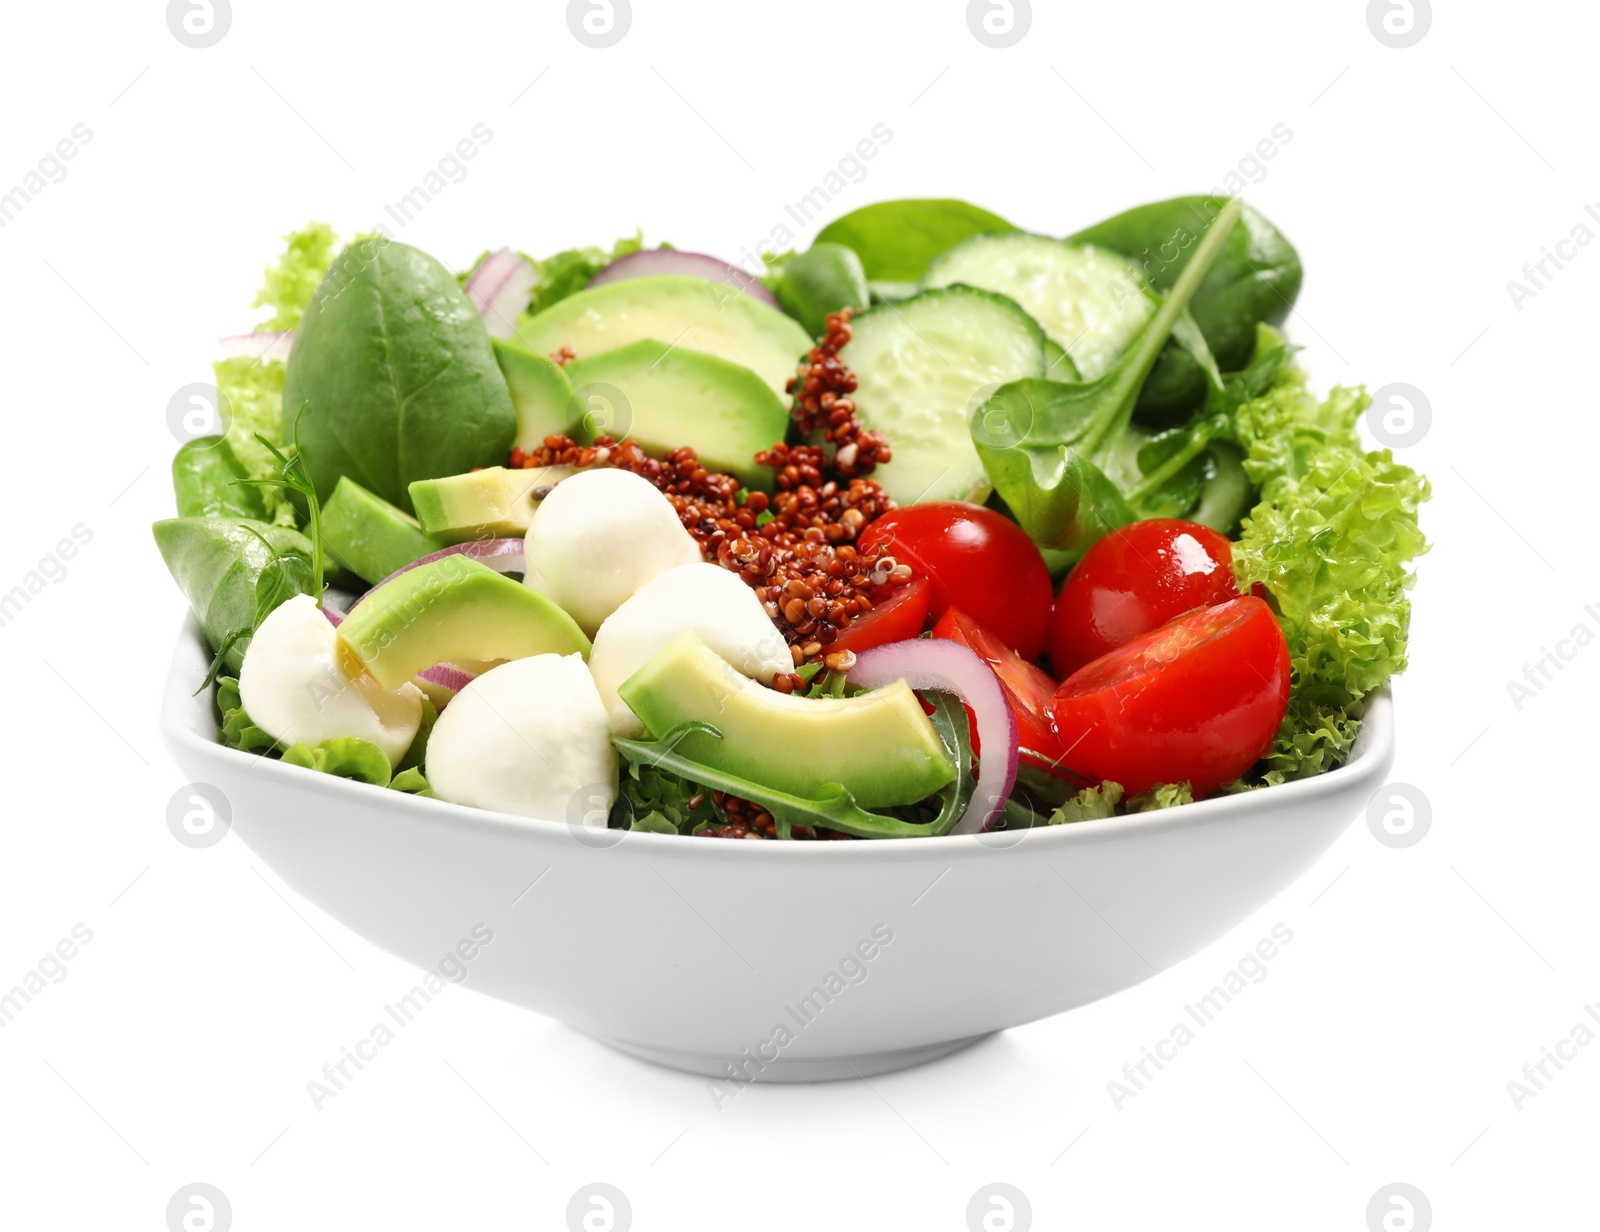 Image of Delicious salad with avocado and quinoa in bowl on white background